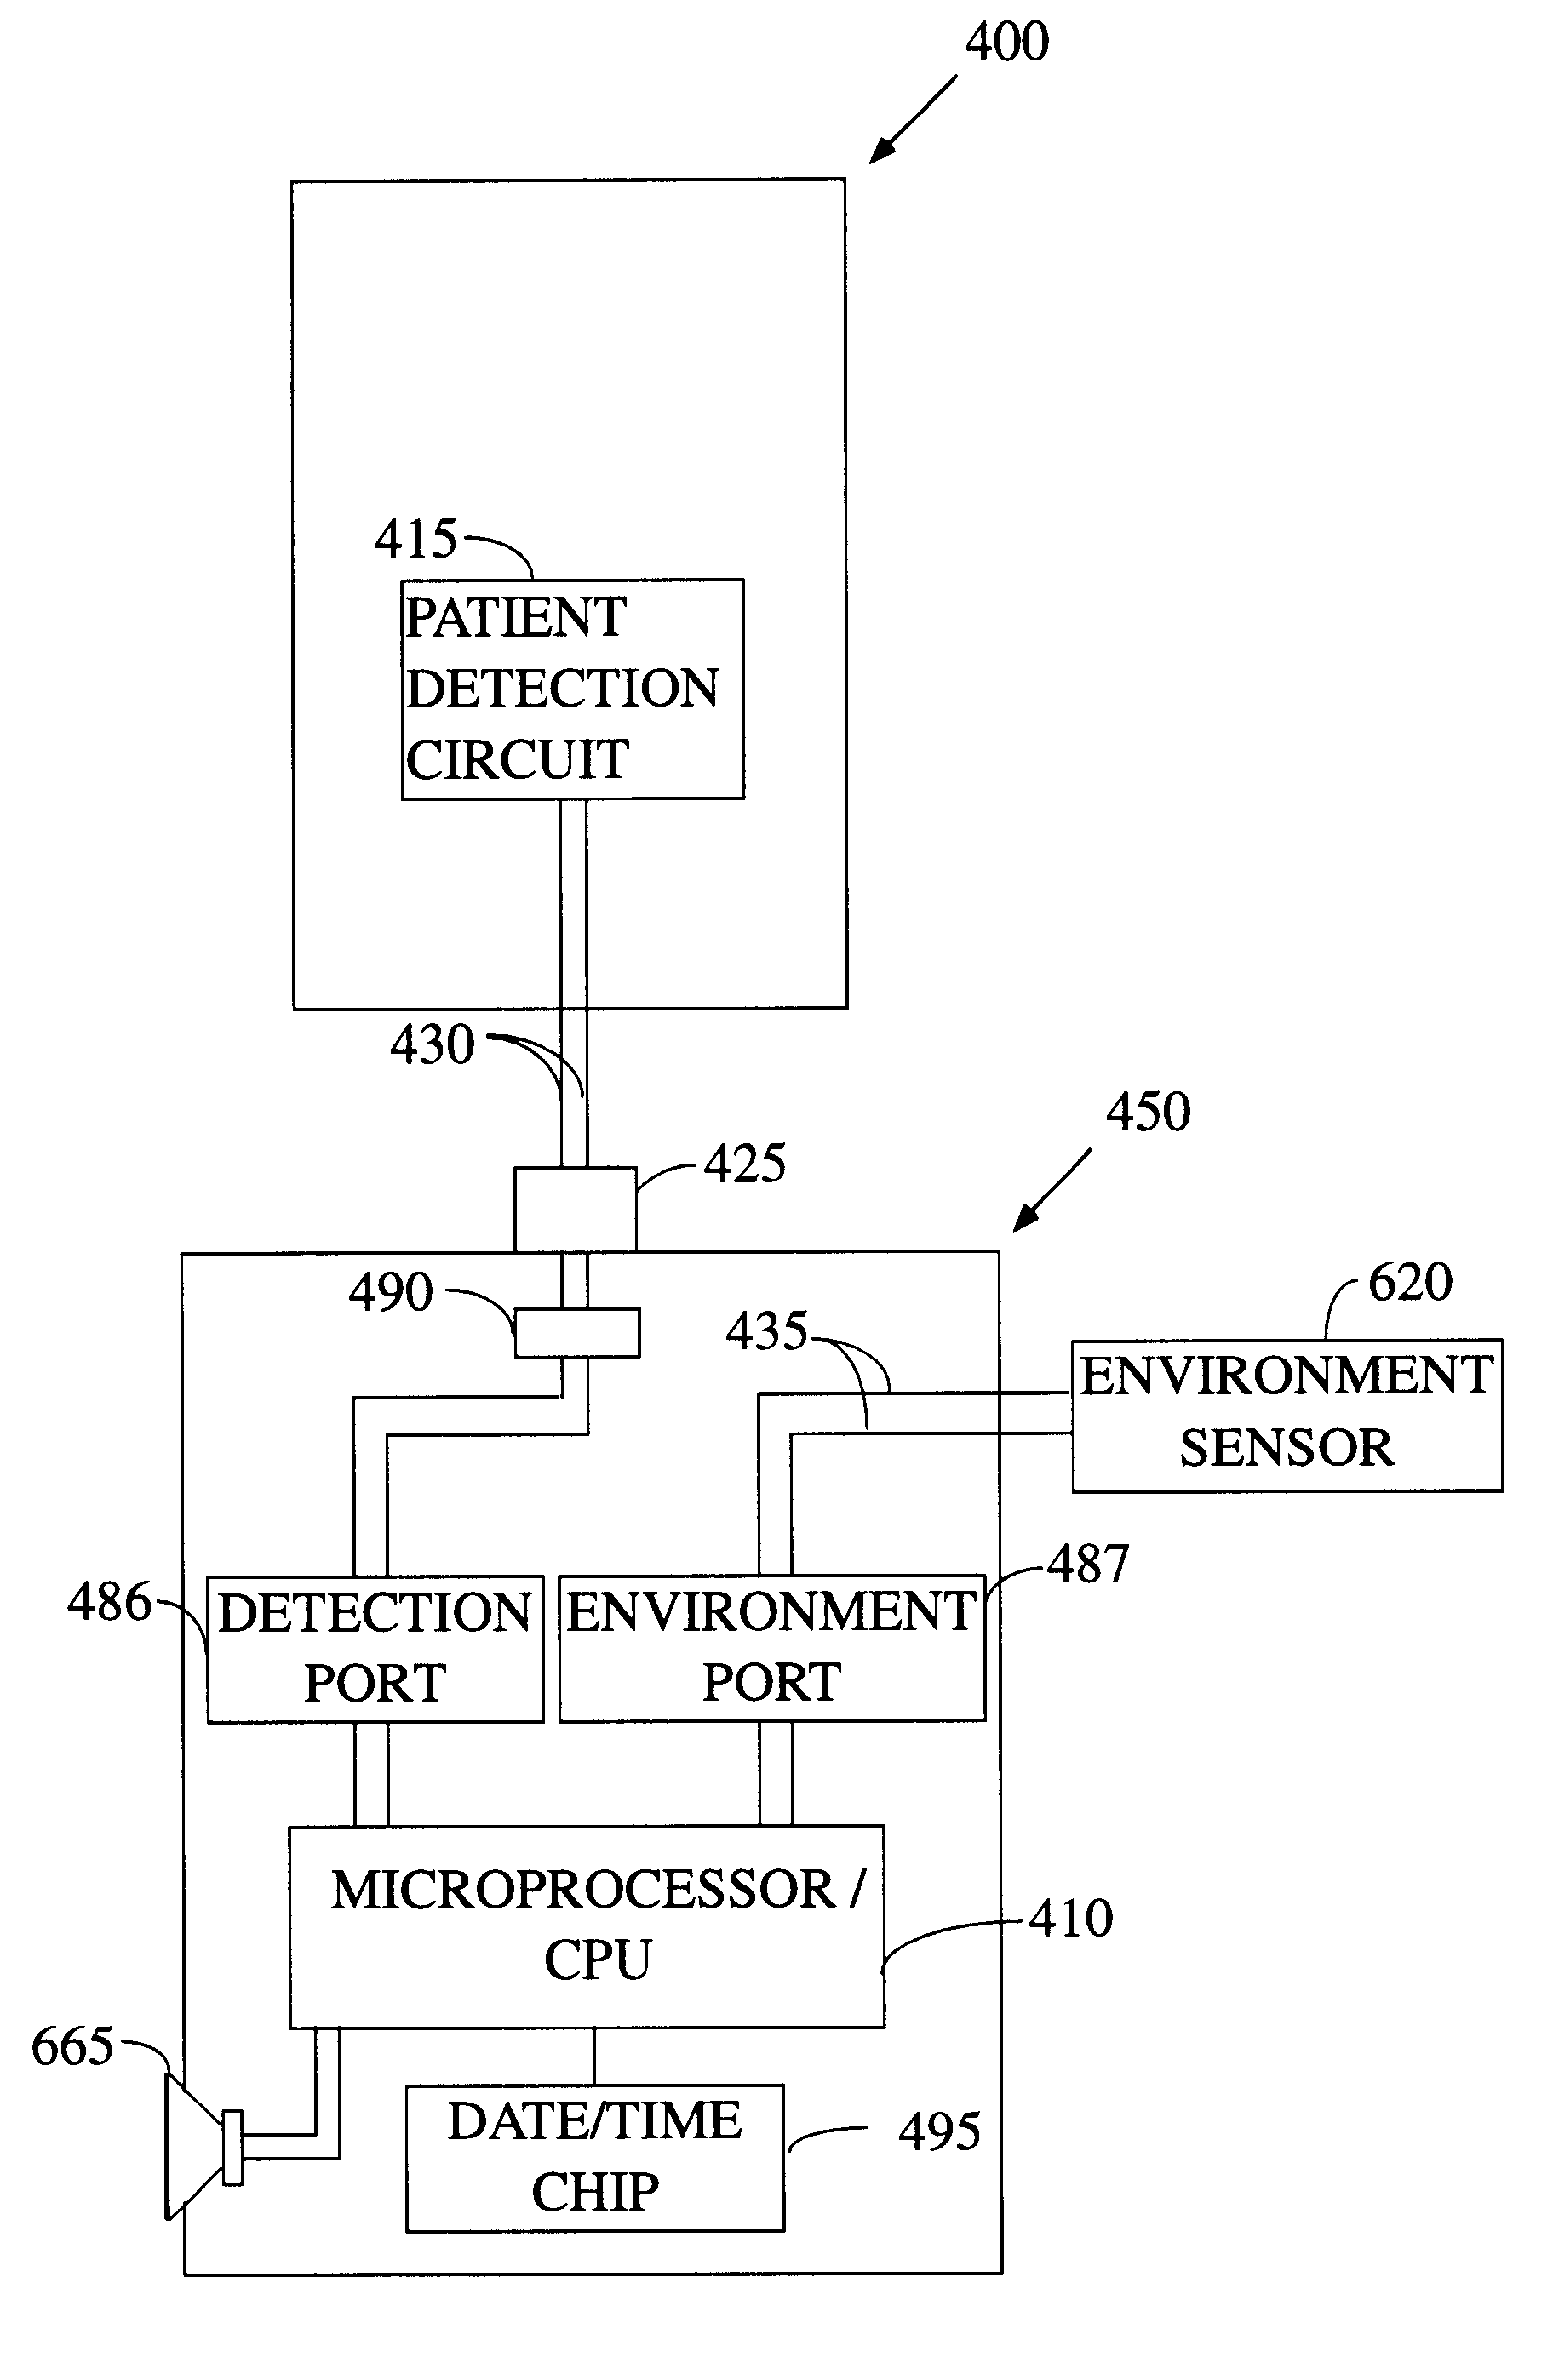 Electronic patient monitor with automatically configured alarm parameters